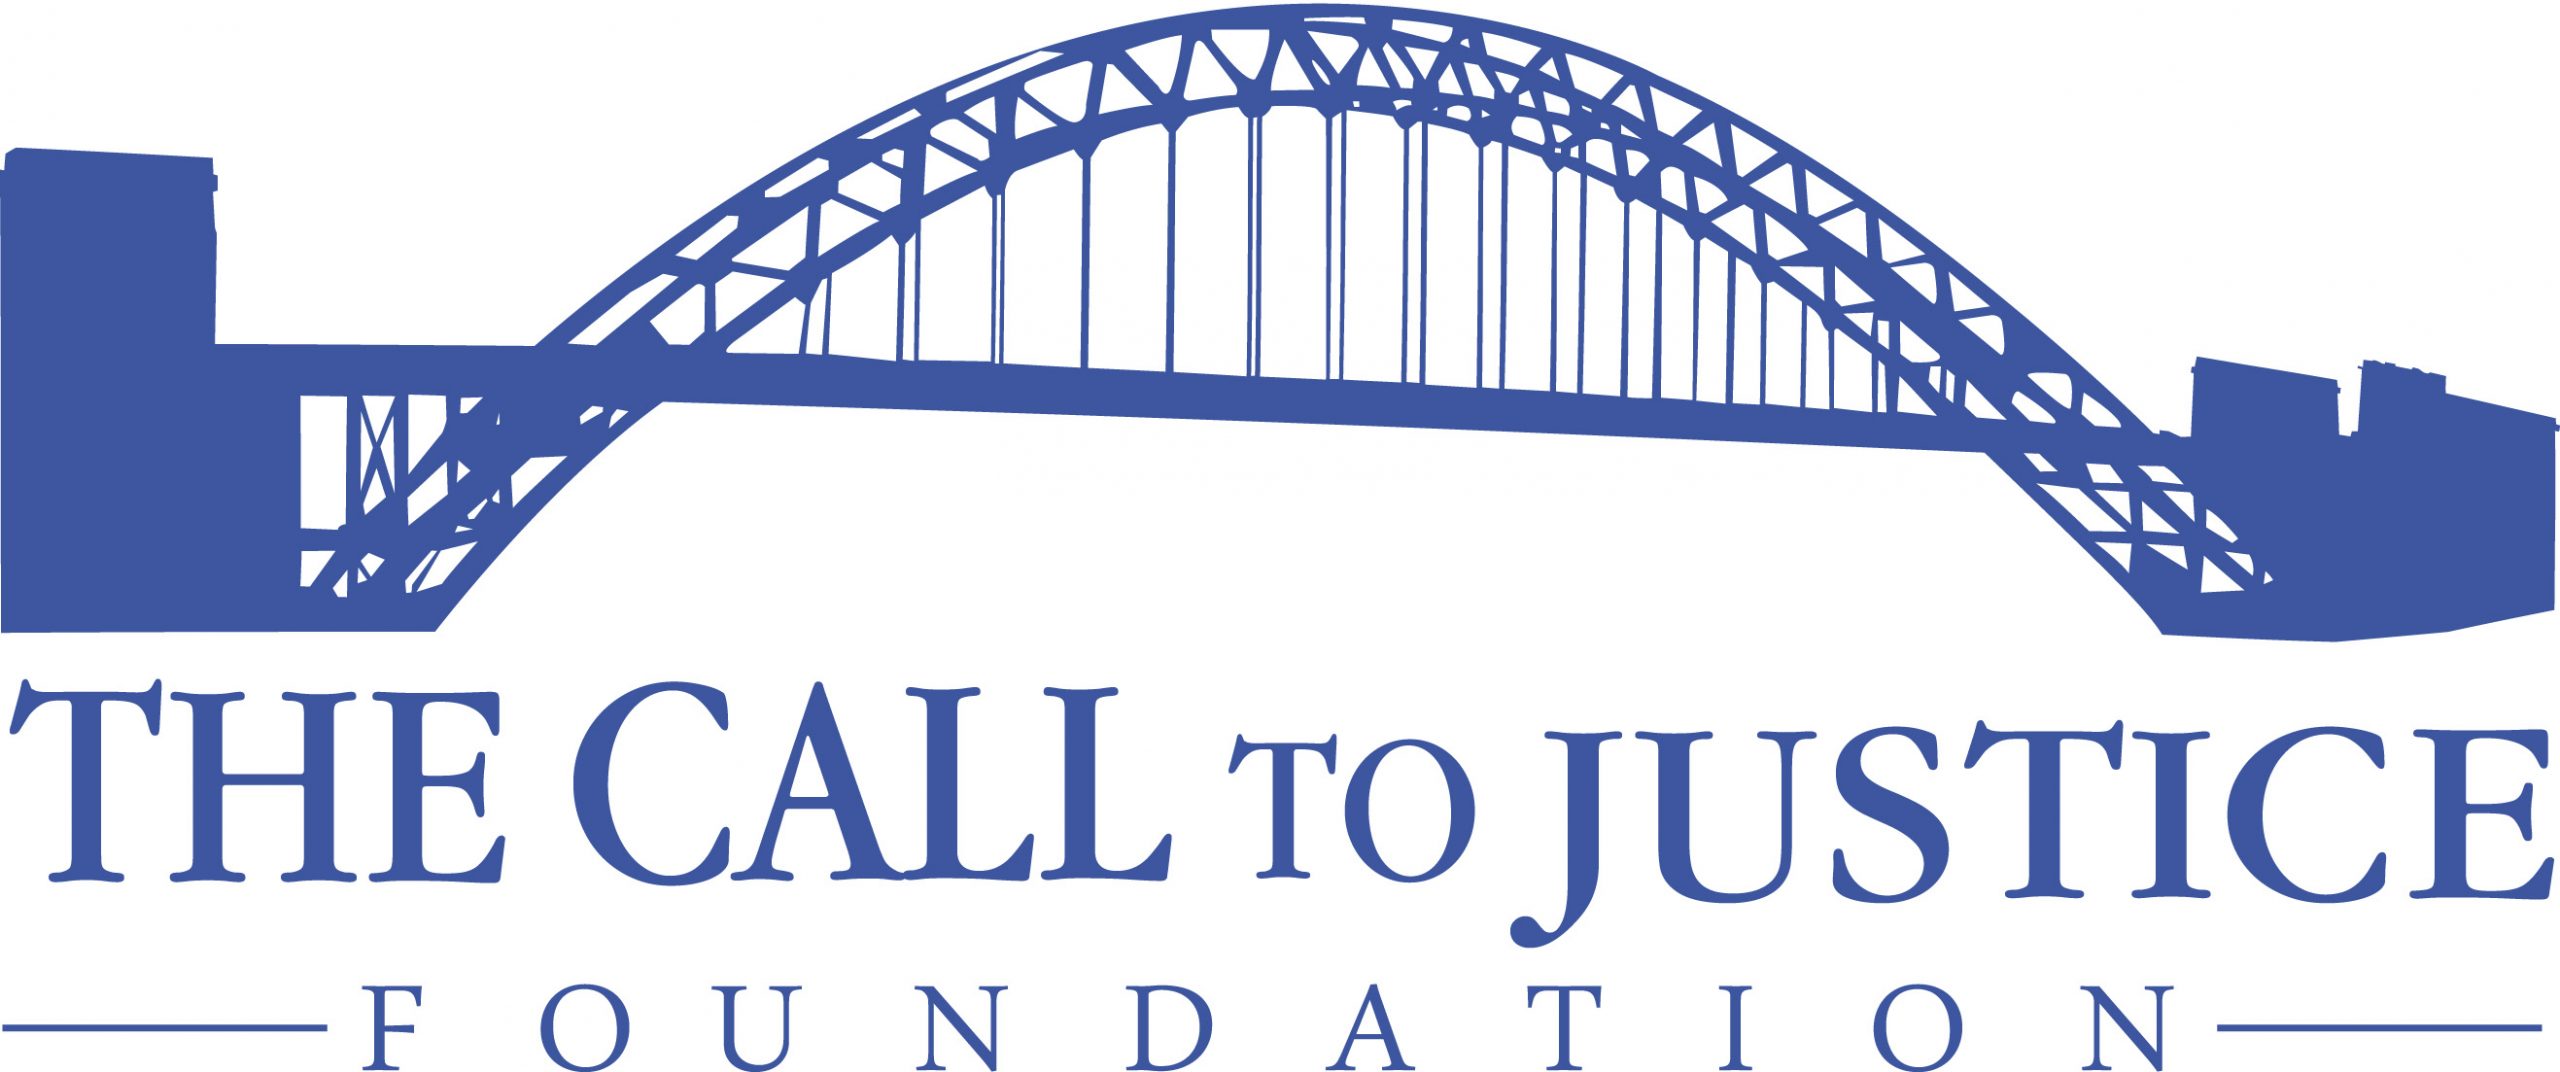 The Call to Justice Foundation